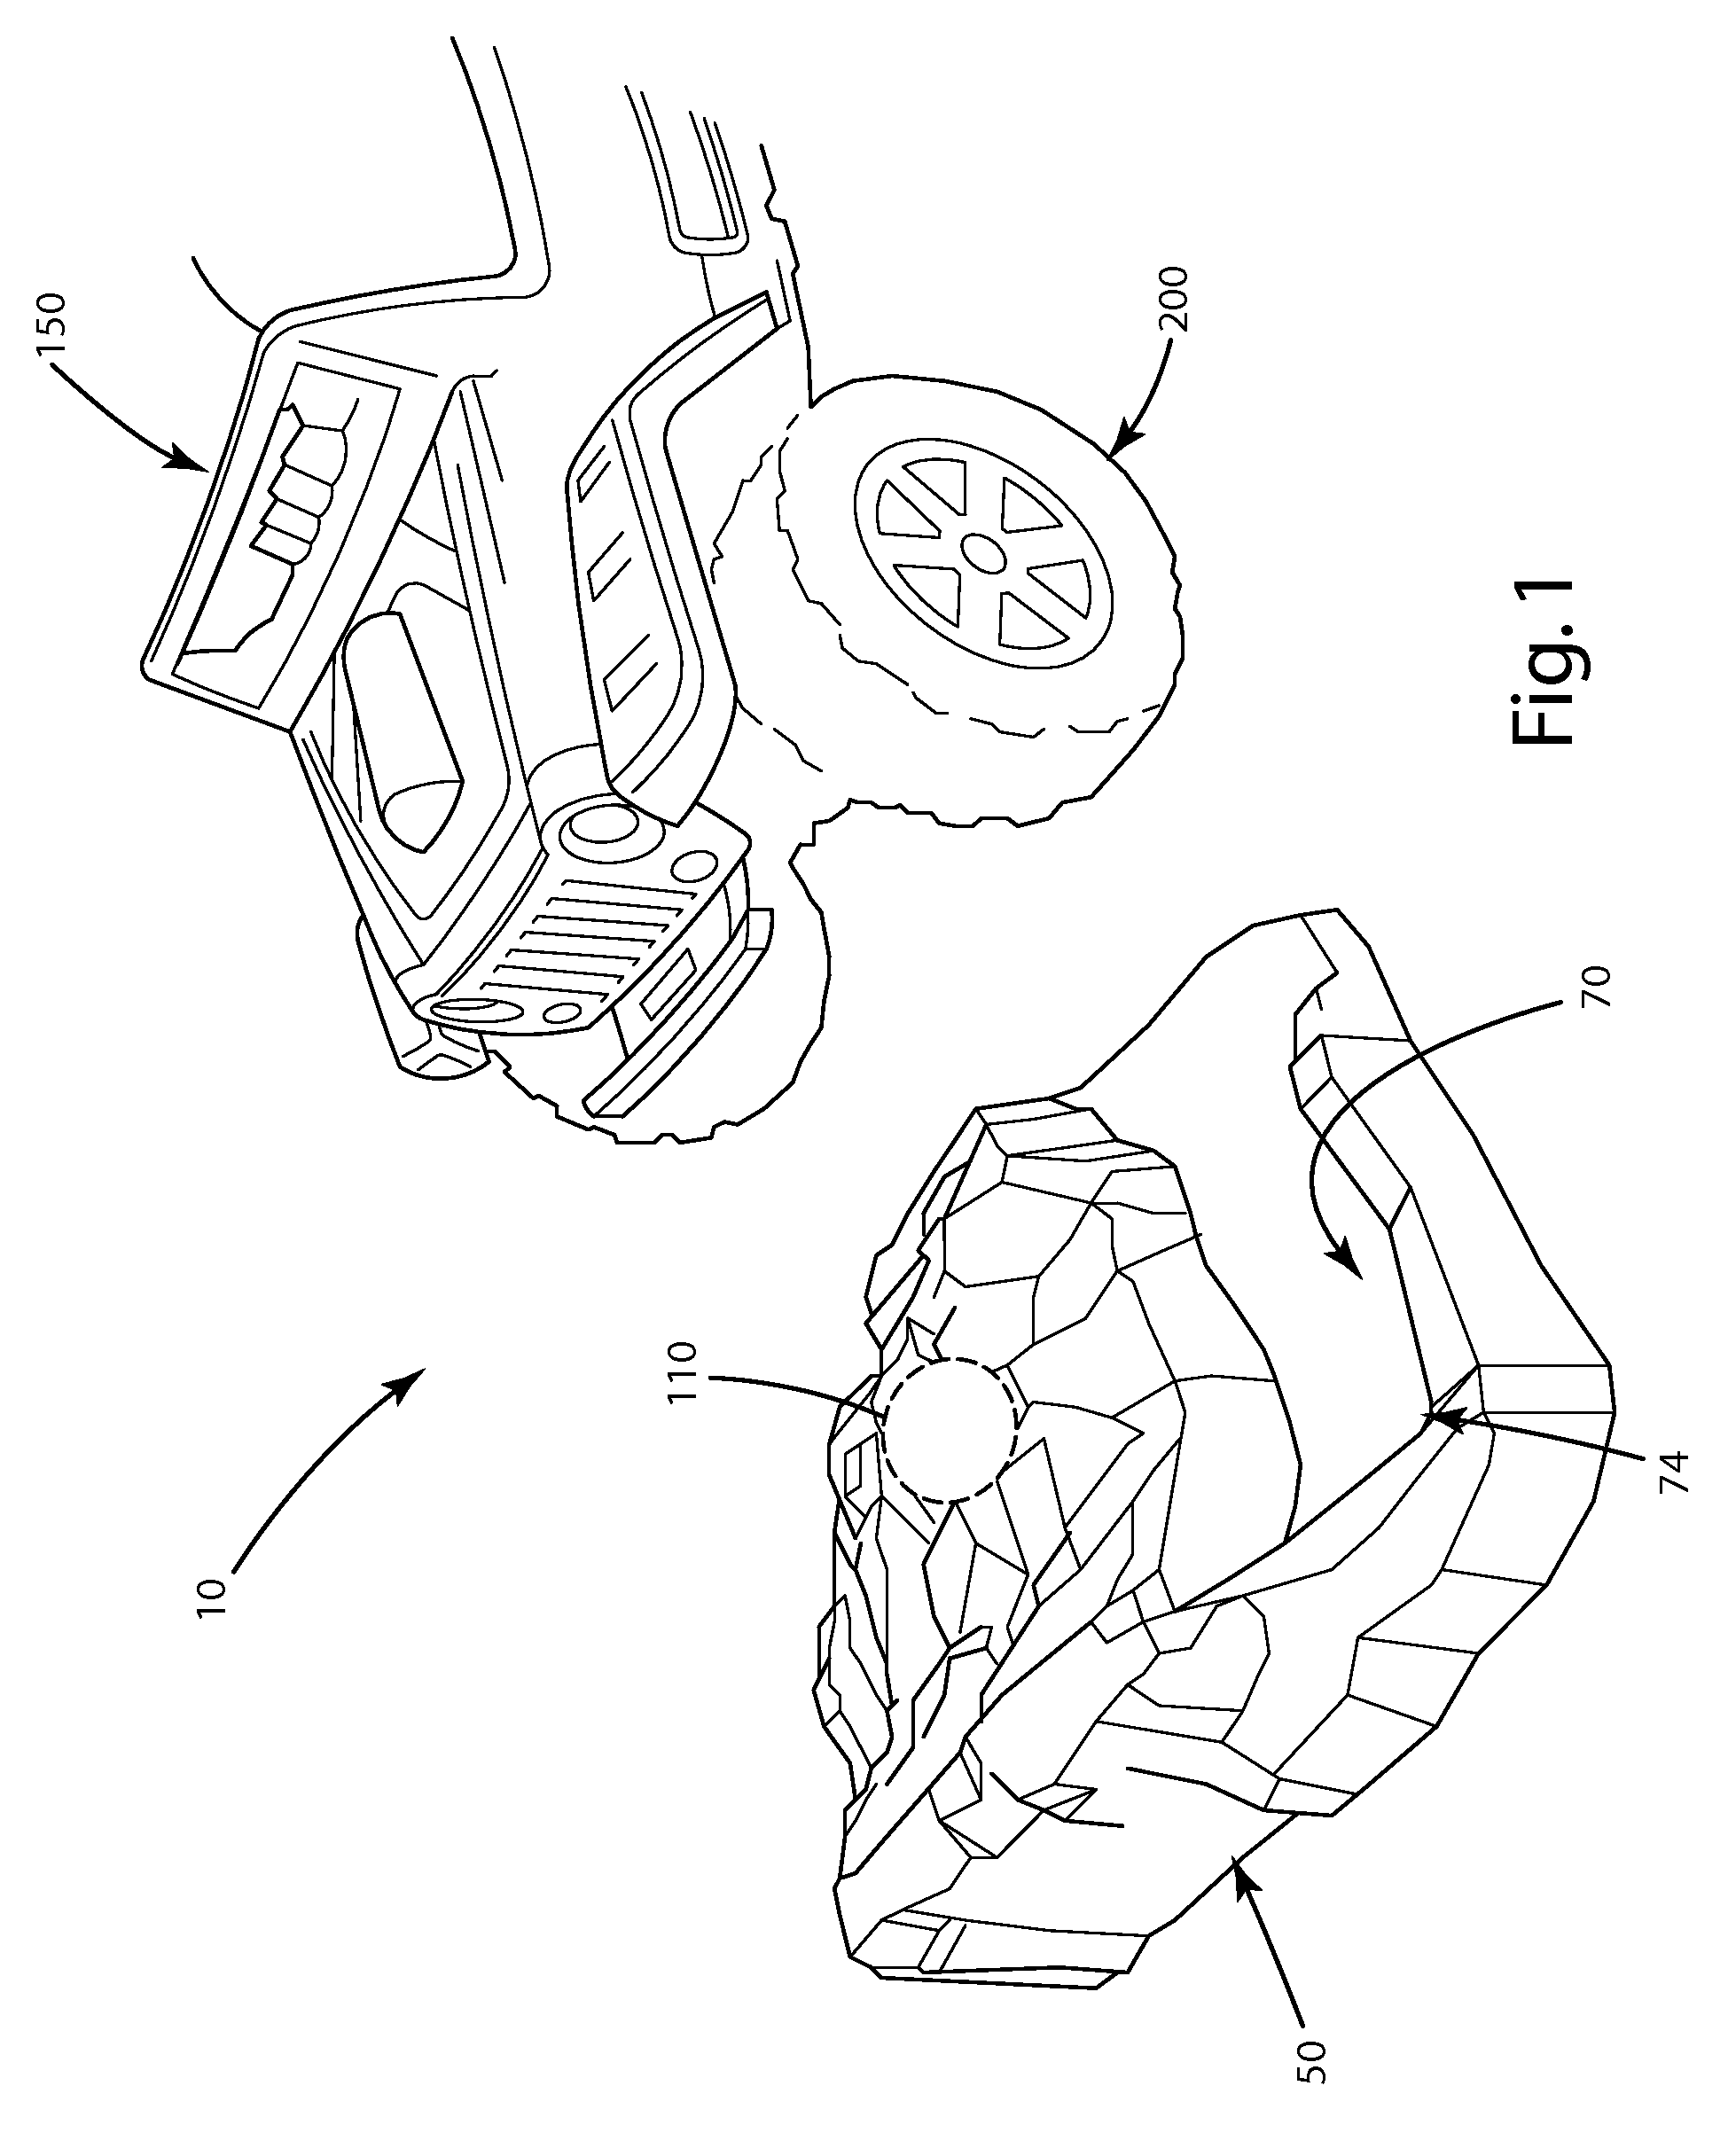 Inductive charging system for electric vehicle